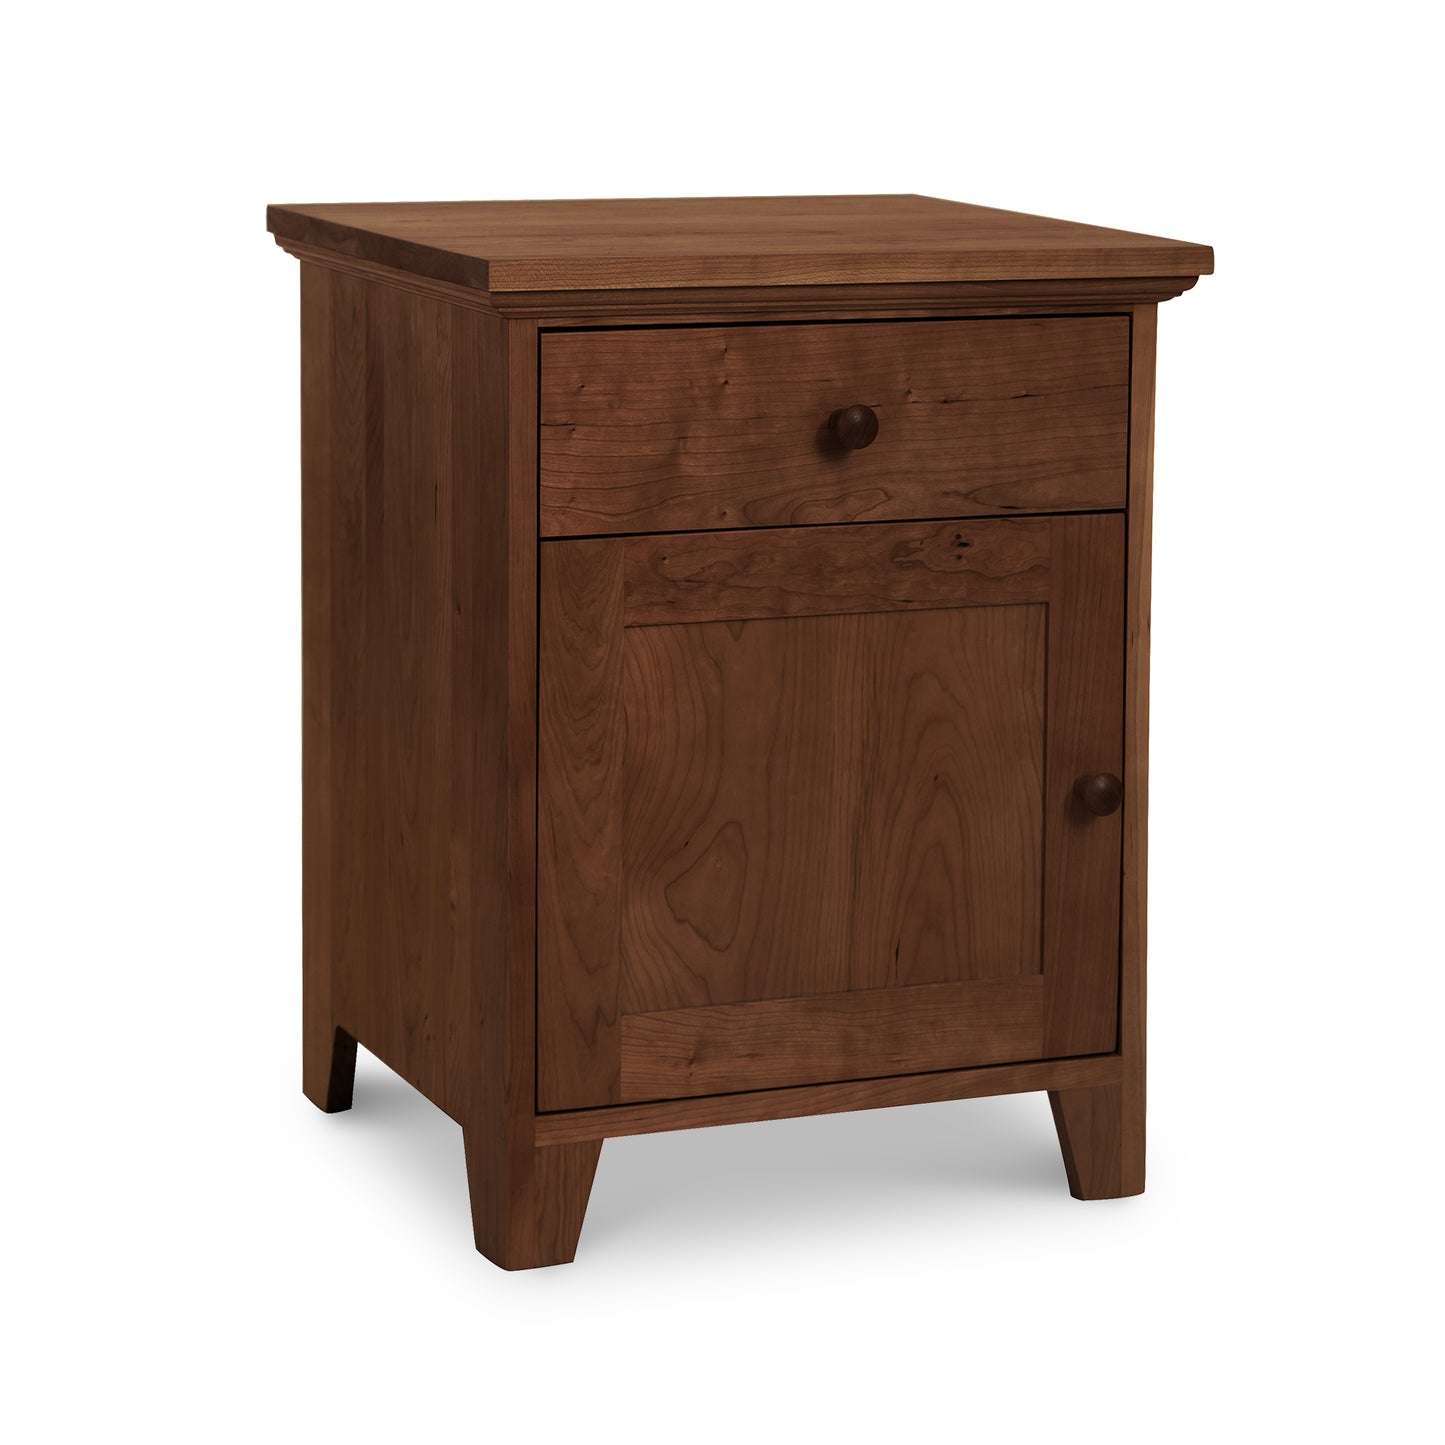 An American Country 1-Drawer Nightstand with Door crafted from solid wood by Lyndon Furniture.